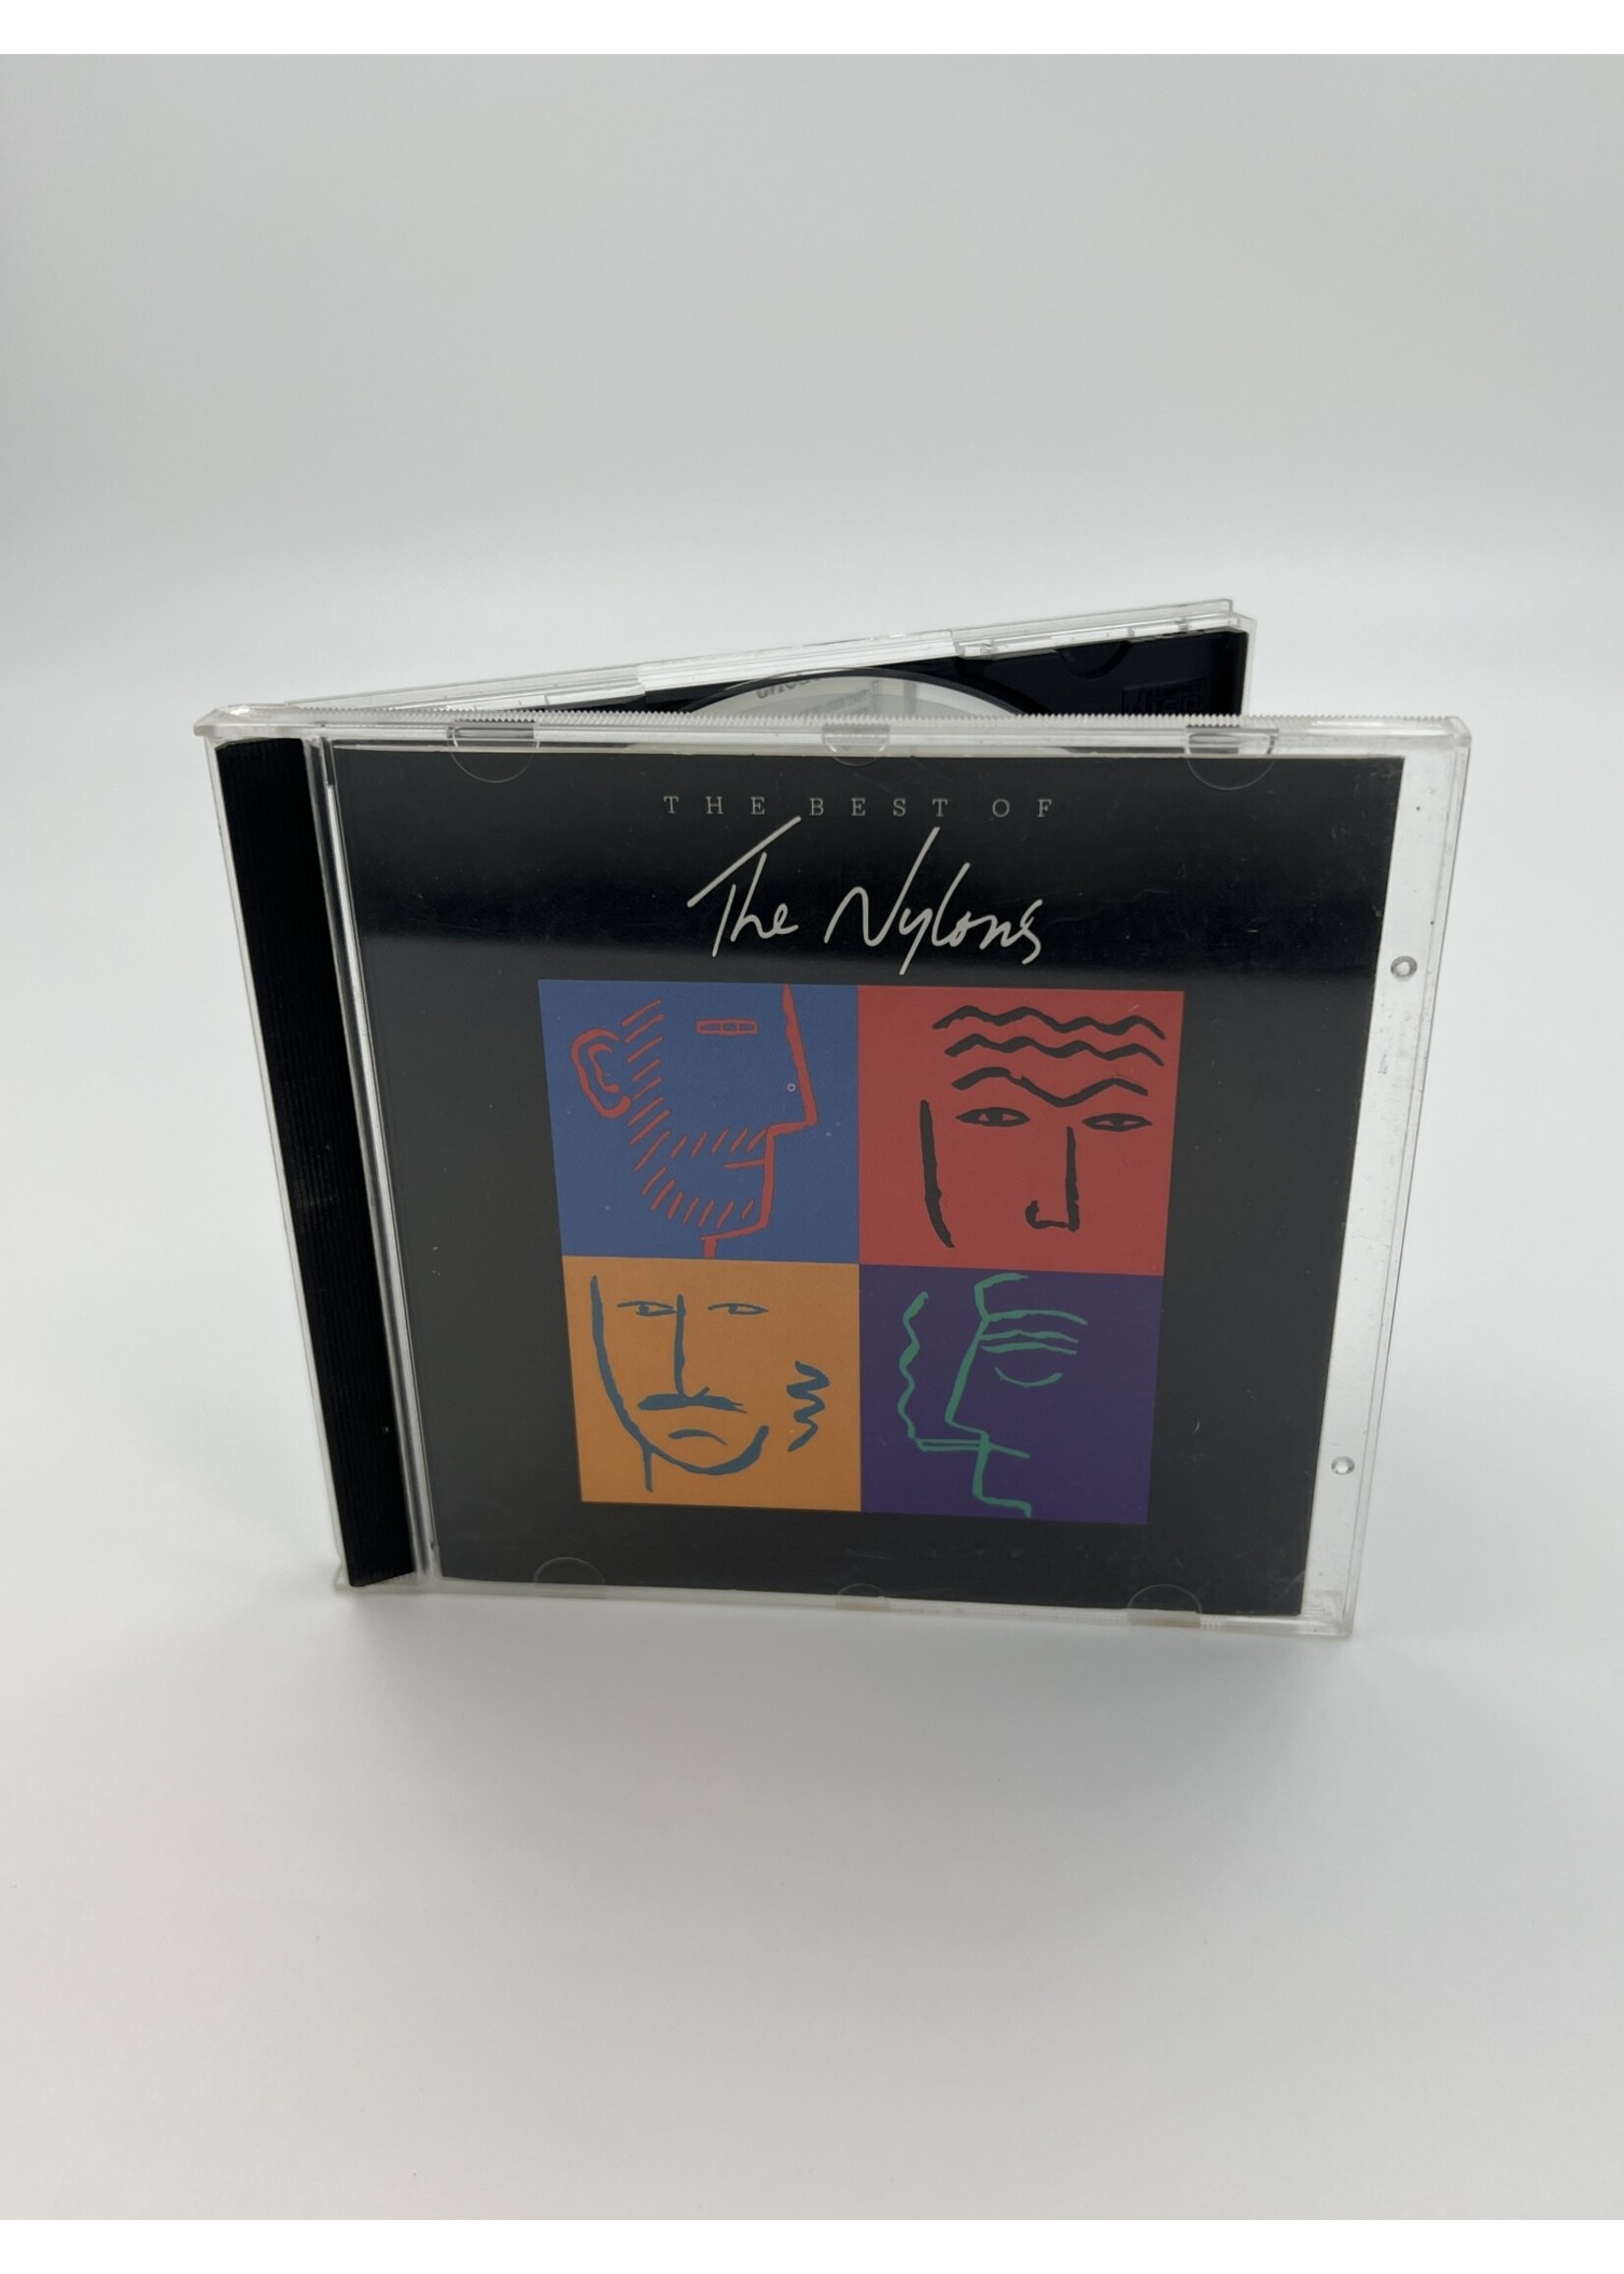 CD   The Best Of The Nylons CD